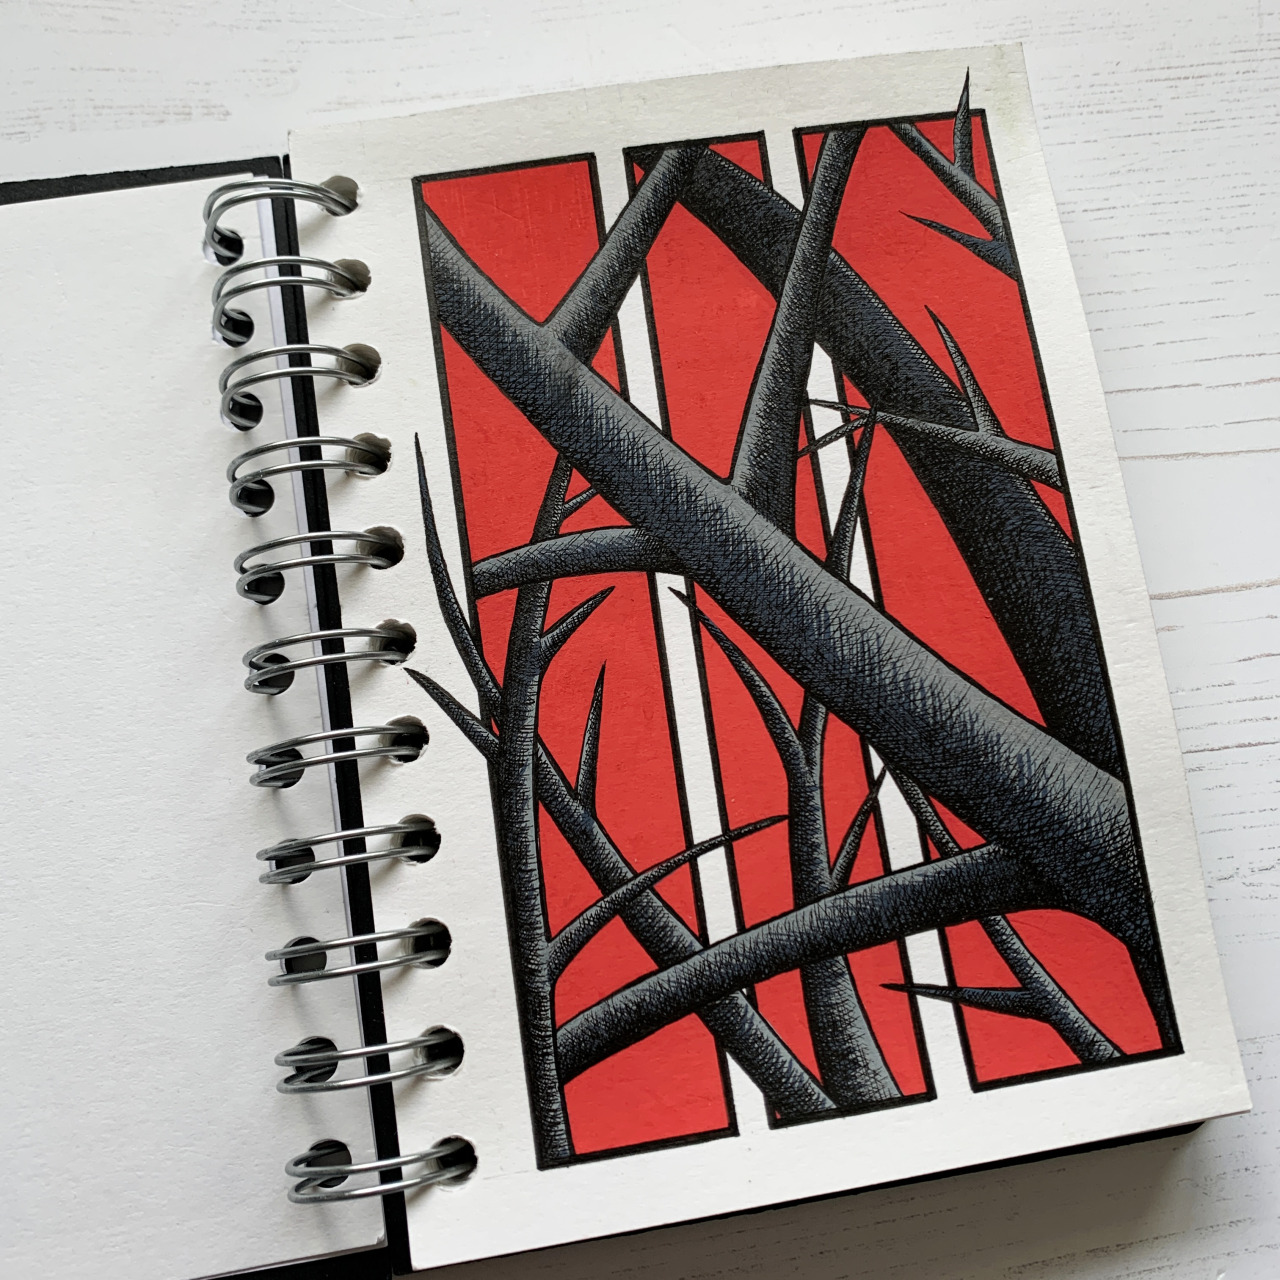 Sketchbook illustration in an A6 Seawhite sketchbook. Posca and Unipens. This was inspired by the opening sequence of Bulgasal: Immortal Souls.

Instagram #ink illustration#ink drawing#sketchbook#sketchbook art #seawhite of brighton #manga inspired#posca#unipen#cross hatching#bulgasal#fineliners#red